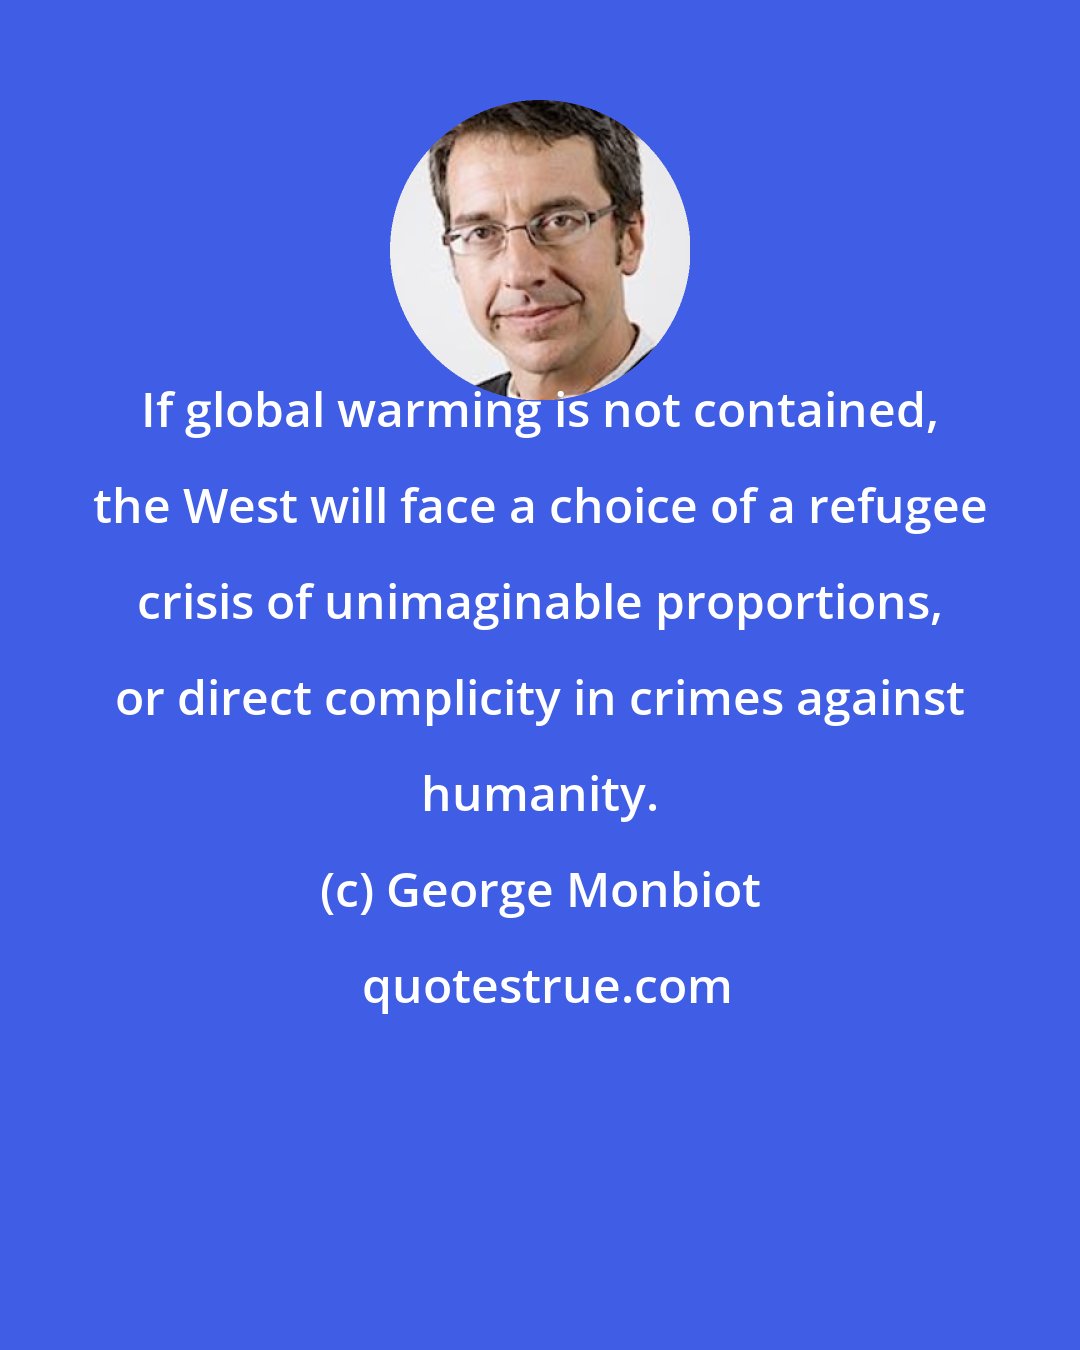 George Monbiot: If global warming is not contained, the West will face a choice of a refugee crisis of unimaginable proportions, or direct complicity in crimes against humanity.